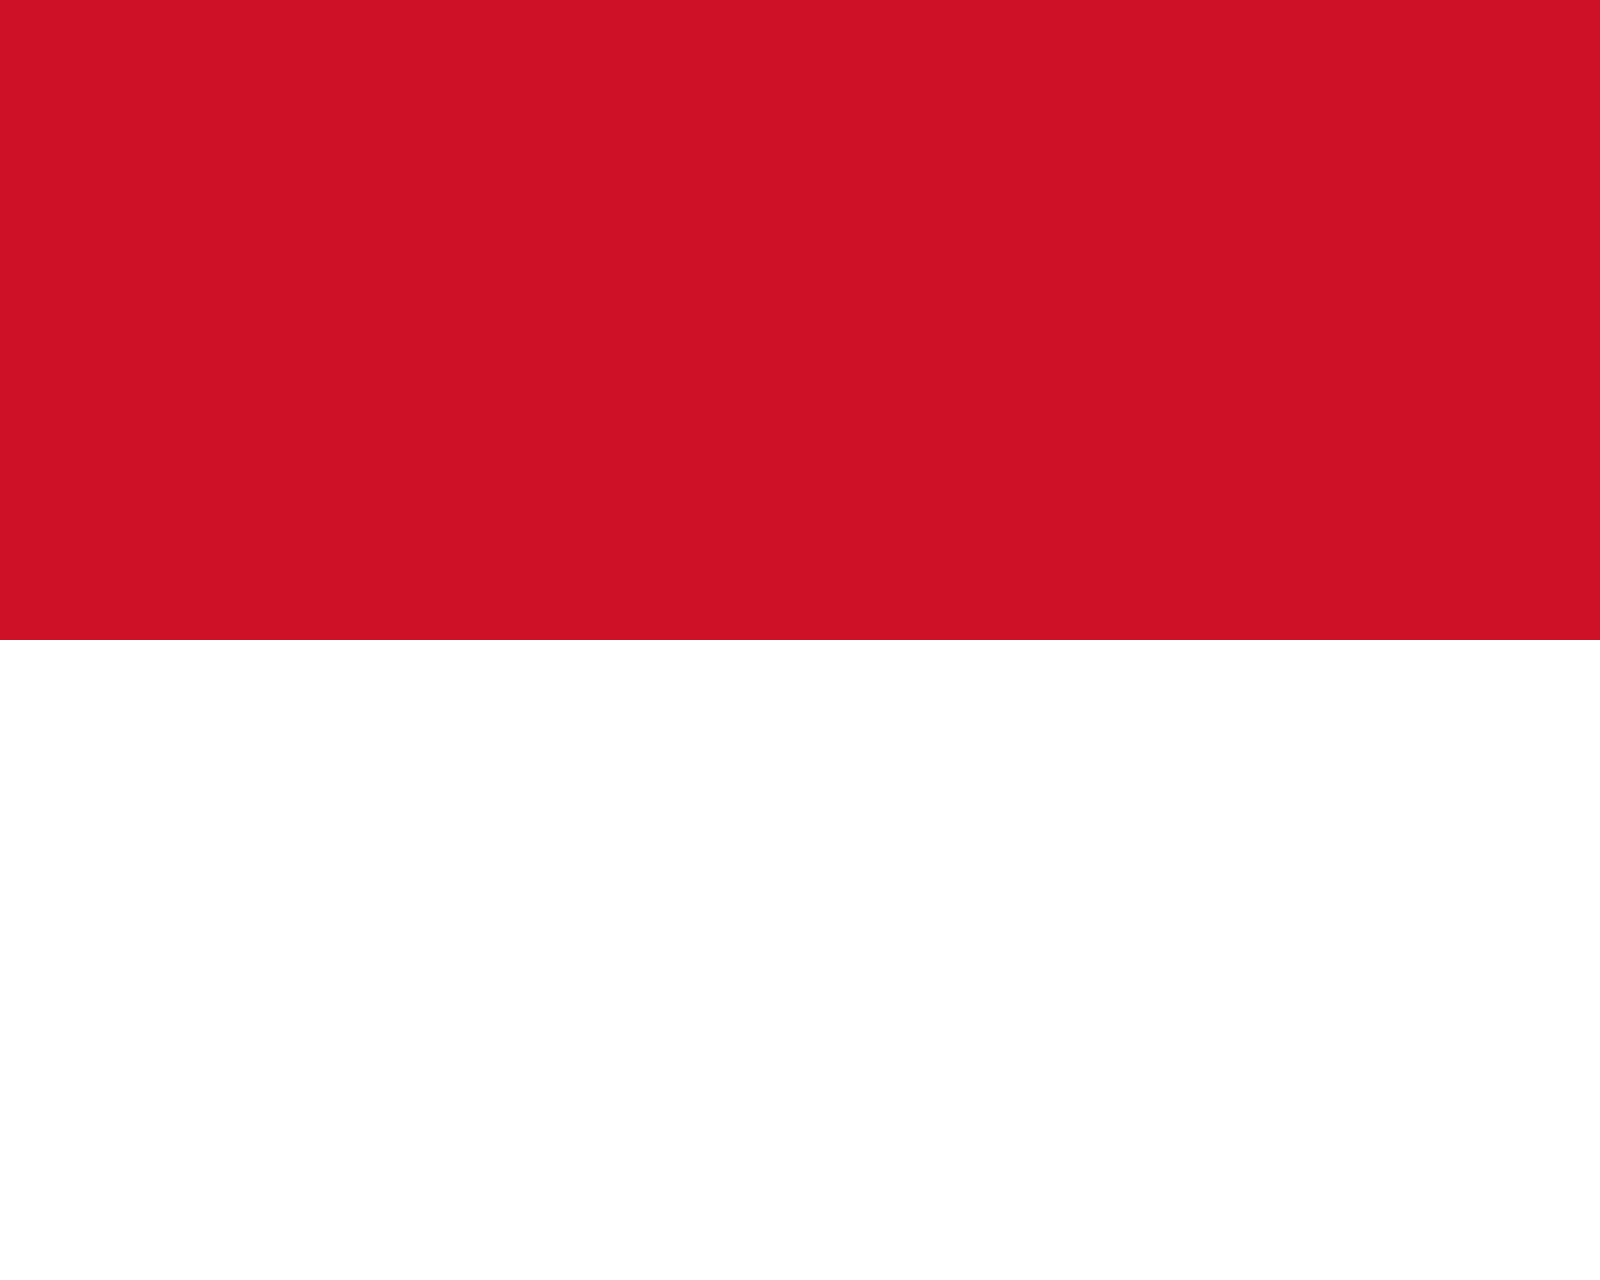 Download A Flag Or Use It On Websites - Monaco, Transparent background PNG HD thumbnail